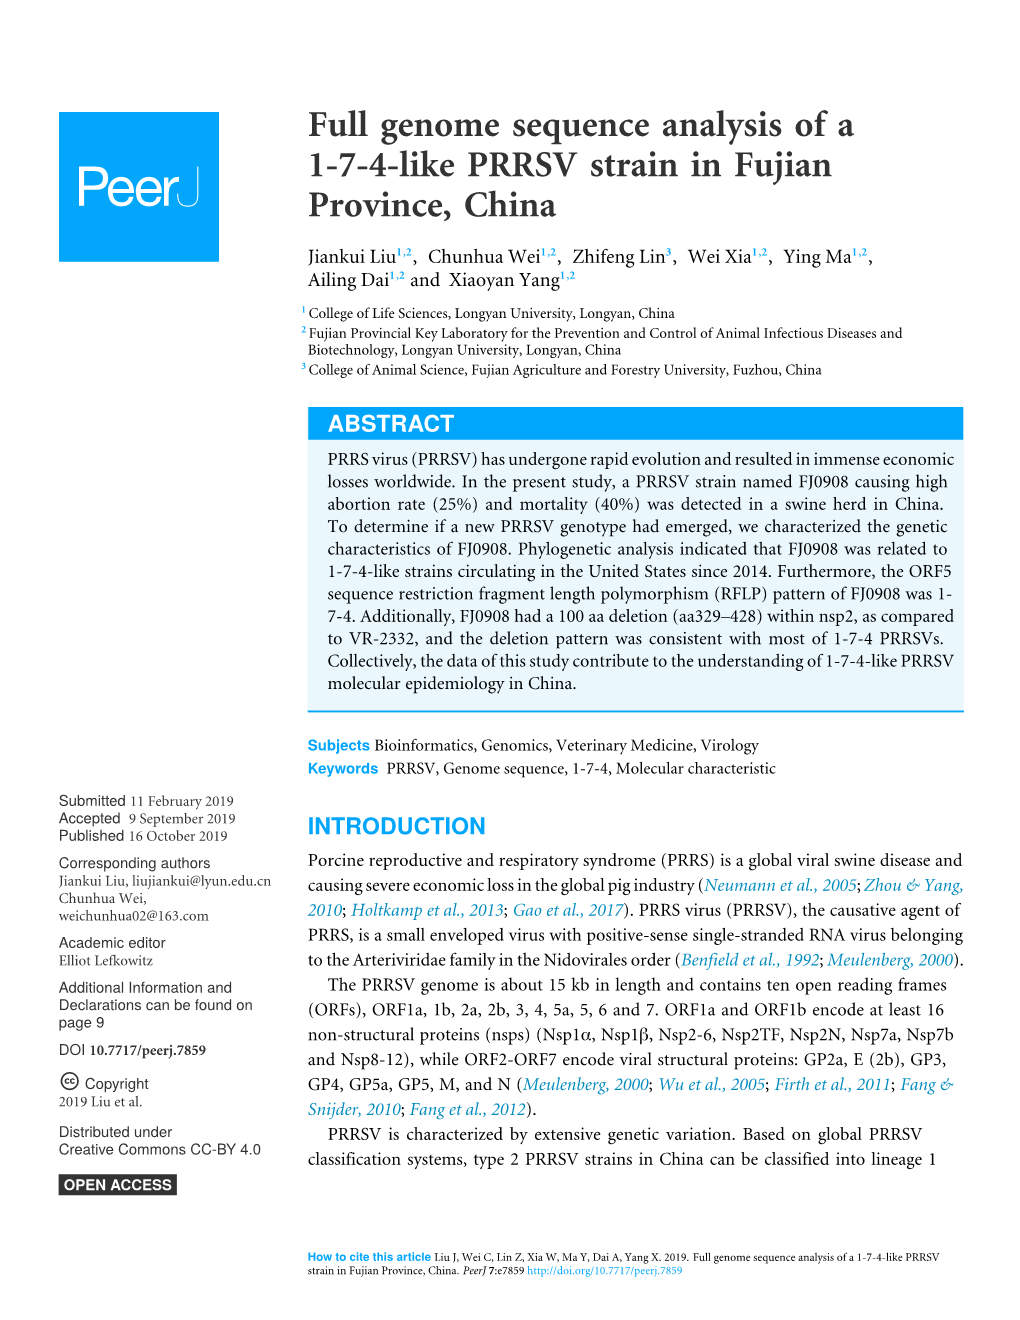 Full Genome Sequence Analysis of a 1-7-4-Like PRRSV Strain in Fujian Province, China